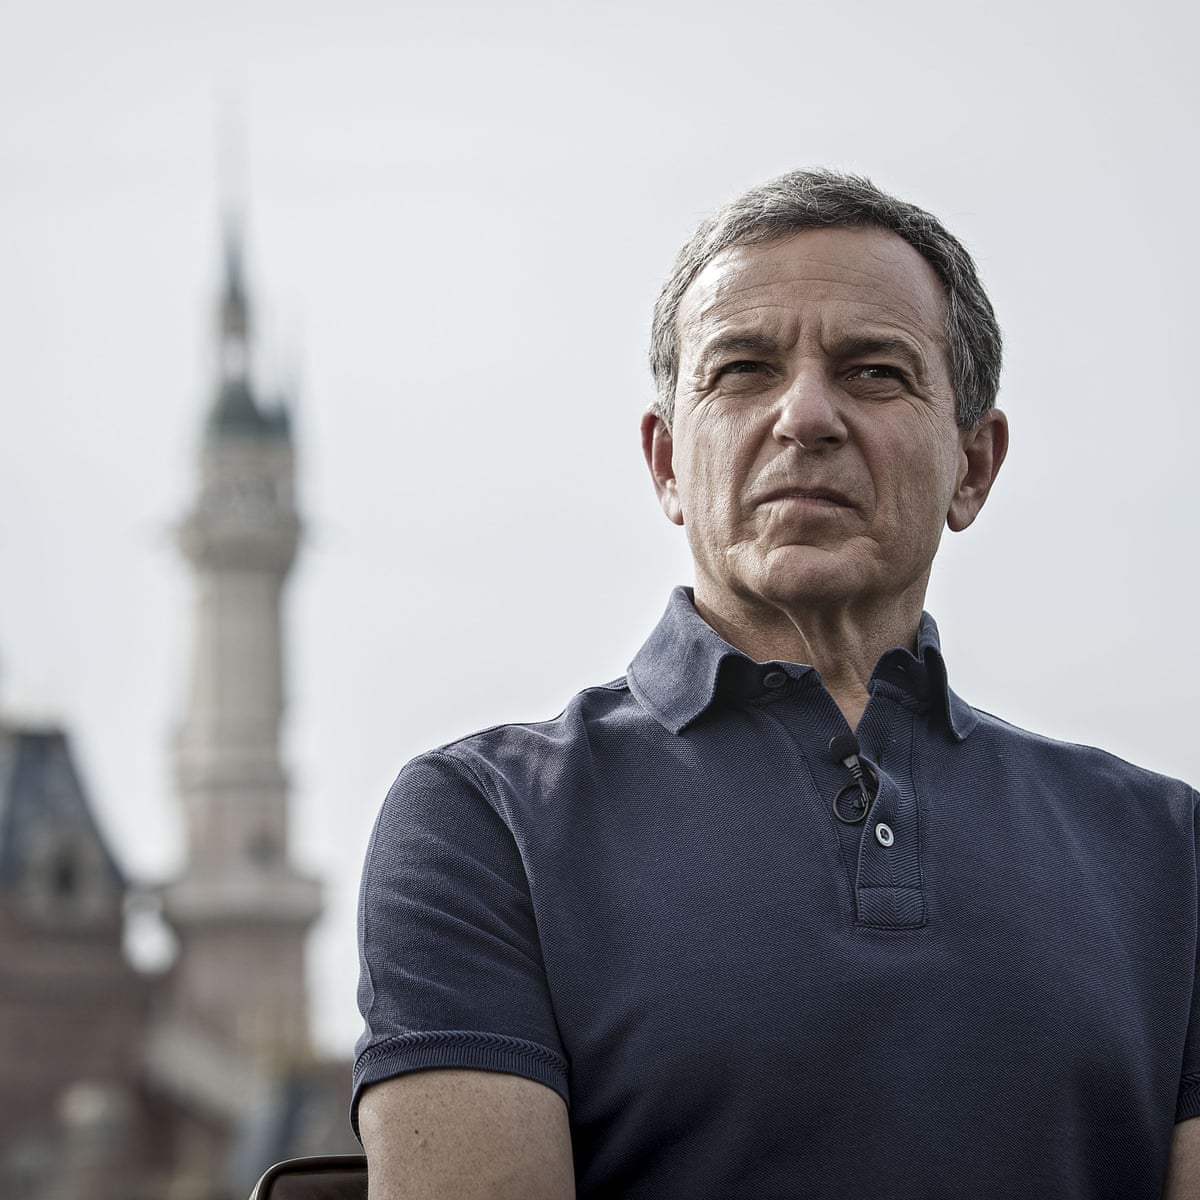 Mickey Mouse candidate: could Disney CEO Bob Iger be the next US president? | Robert Iger | The Guardian